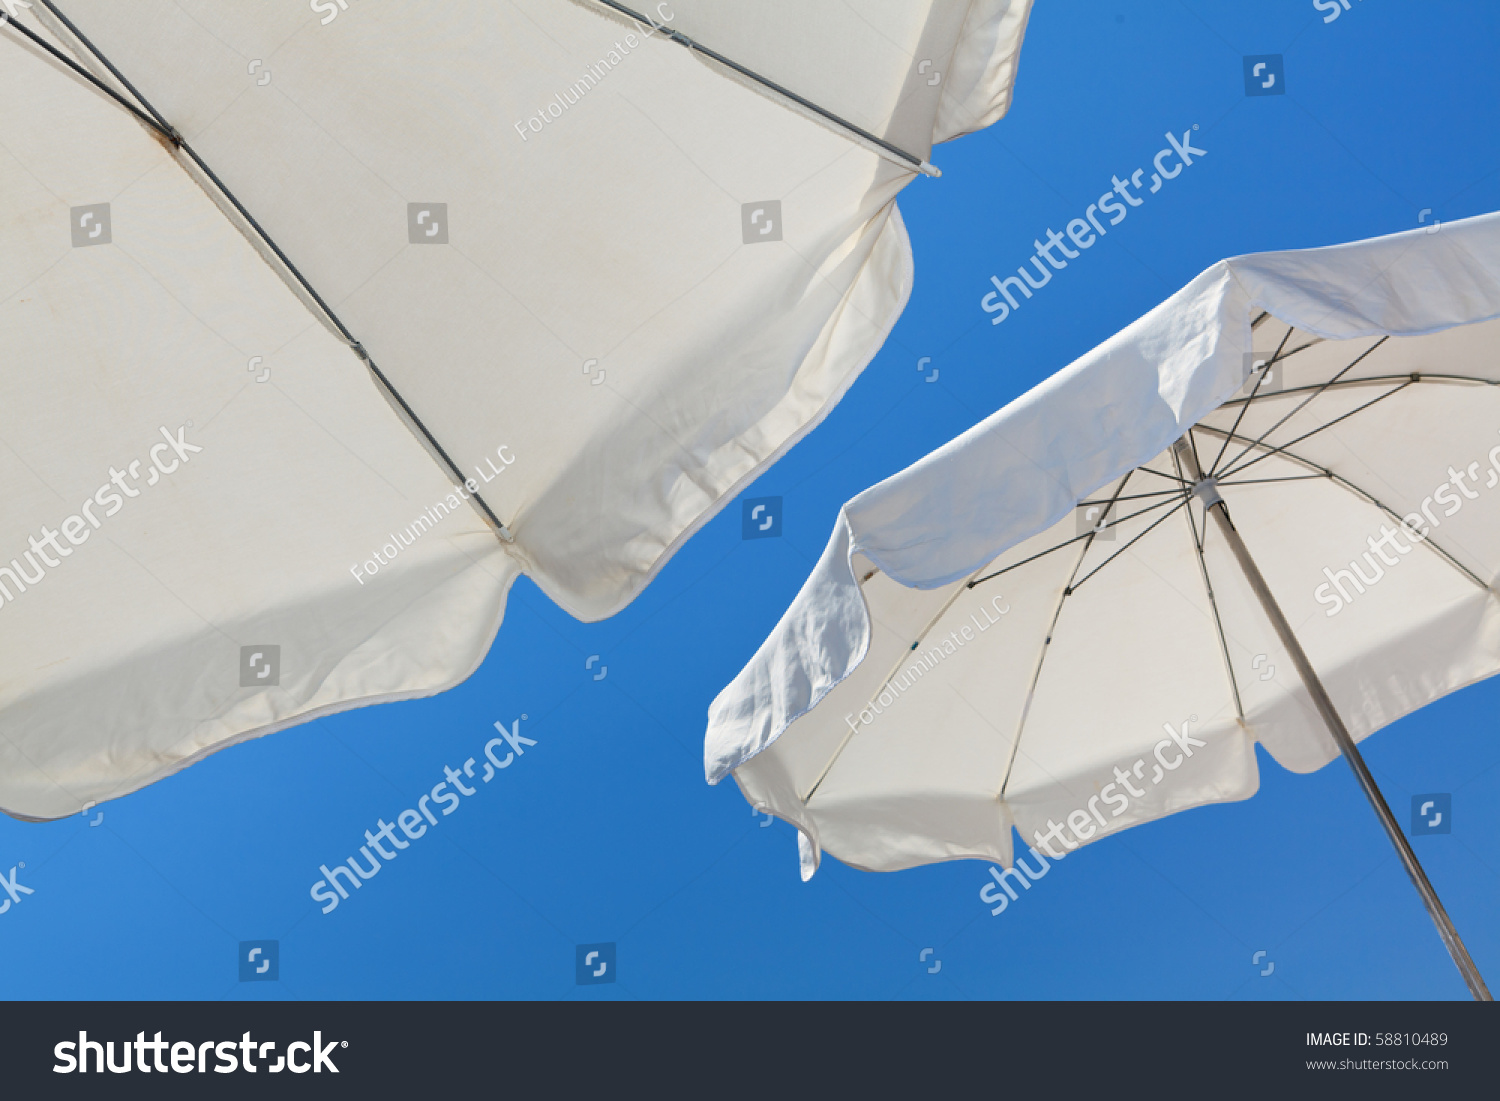 White beach umbrellas against a blue sky in the French Riviera in Nice, France. #58810489